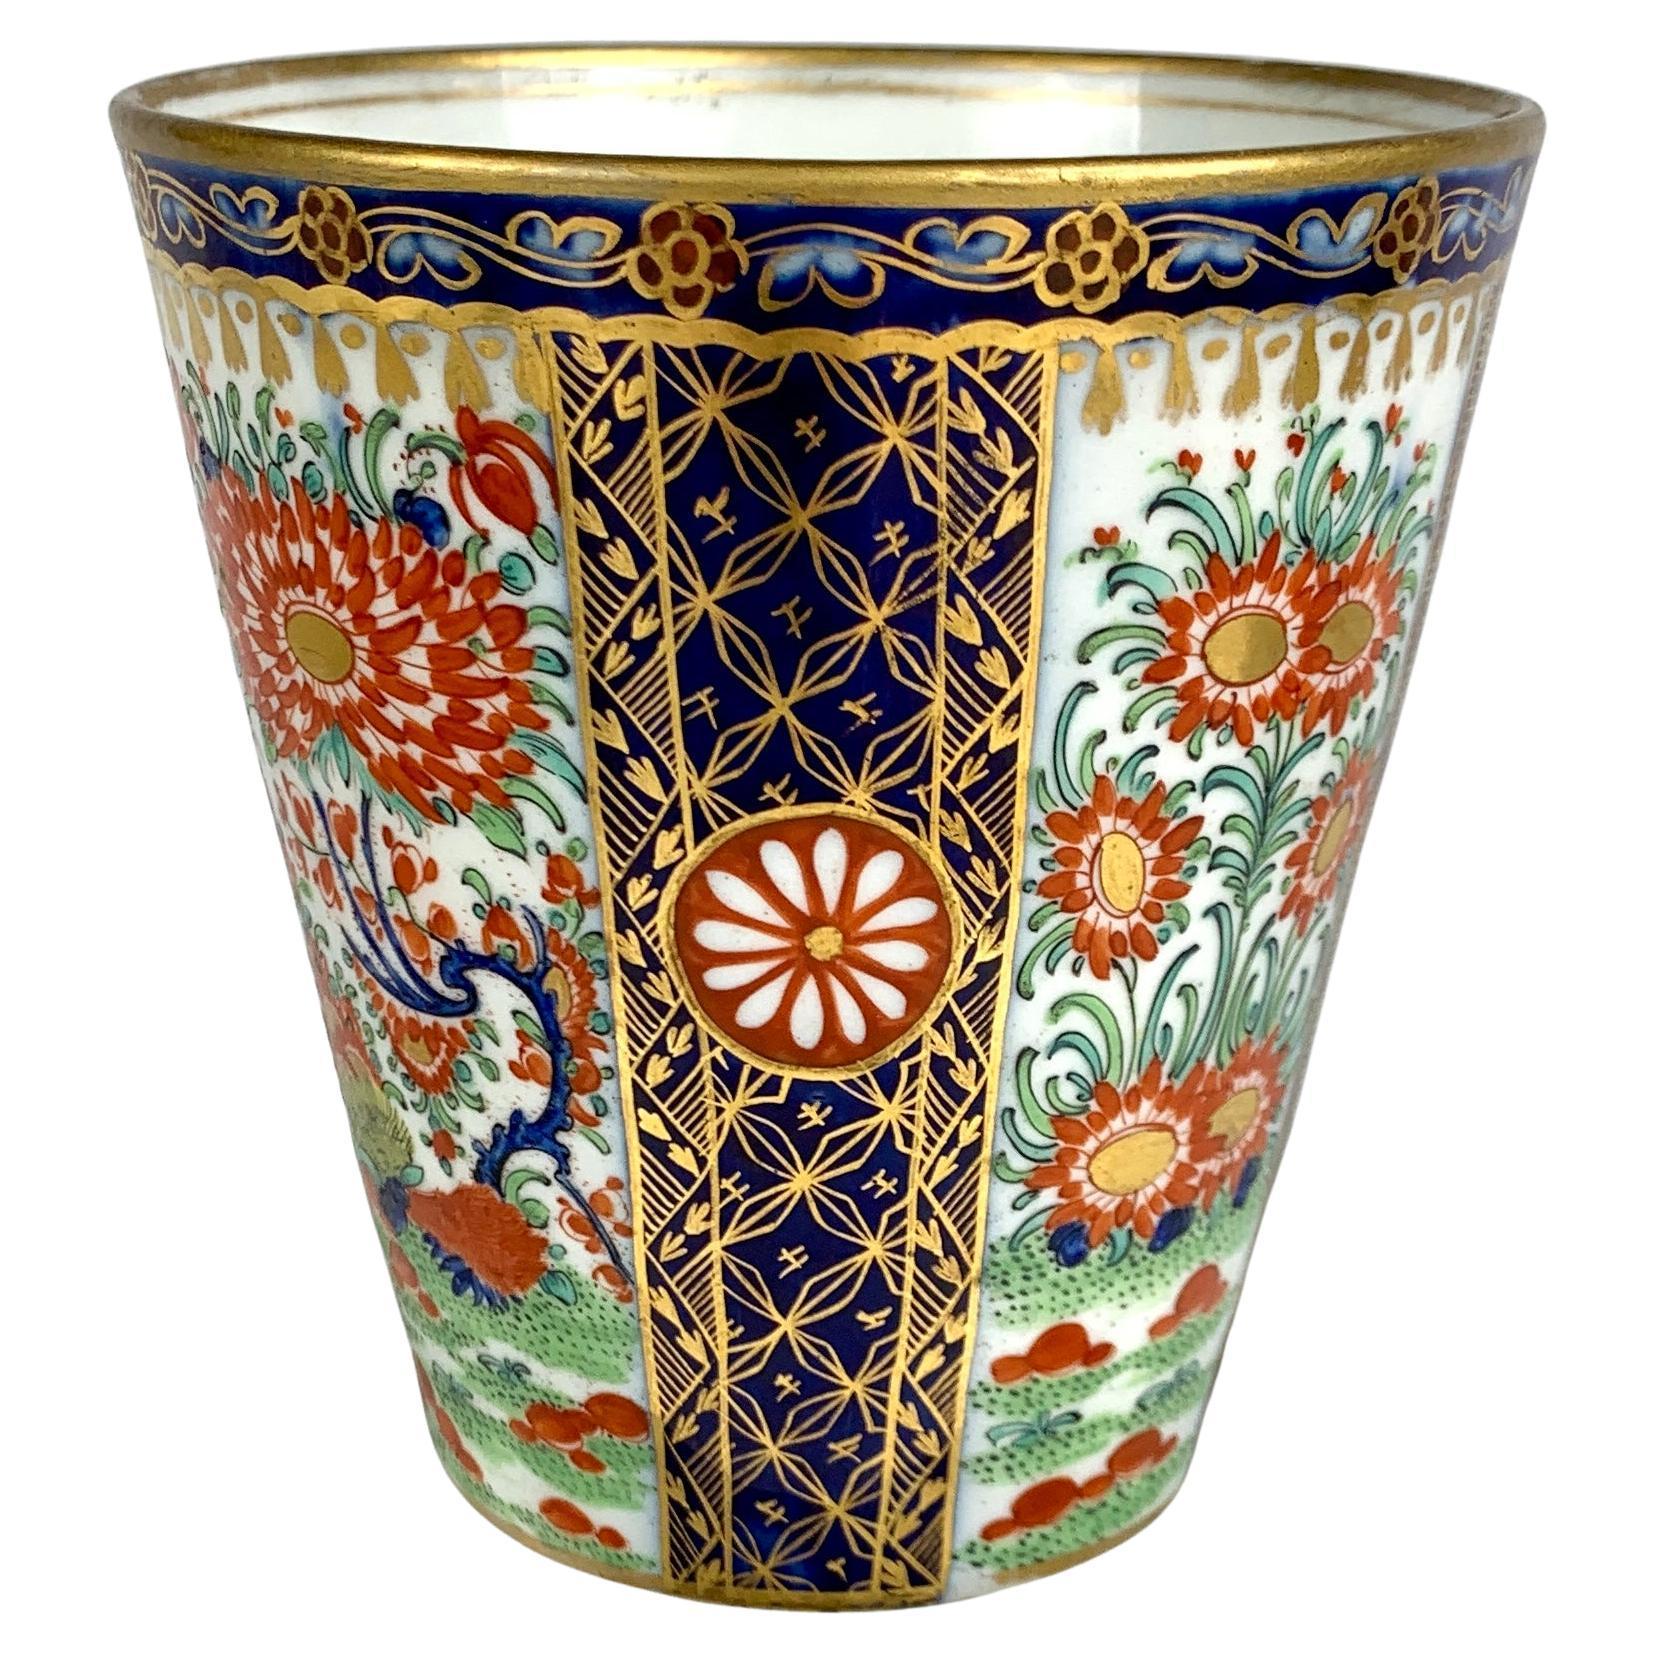 This is a gem!
This hand painted Chamberlains Worcester beaker is decorated in the 